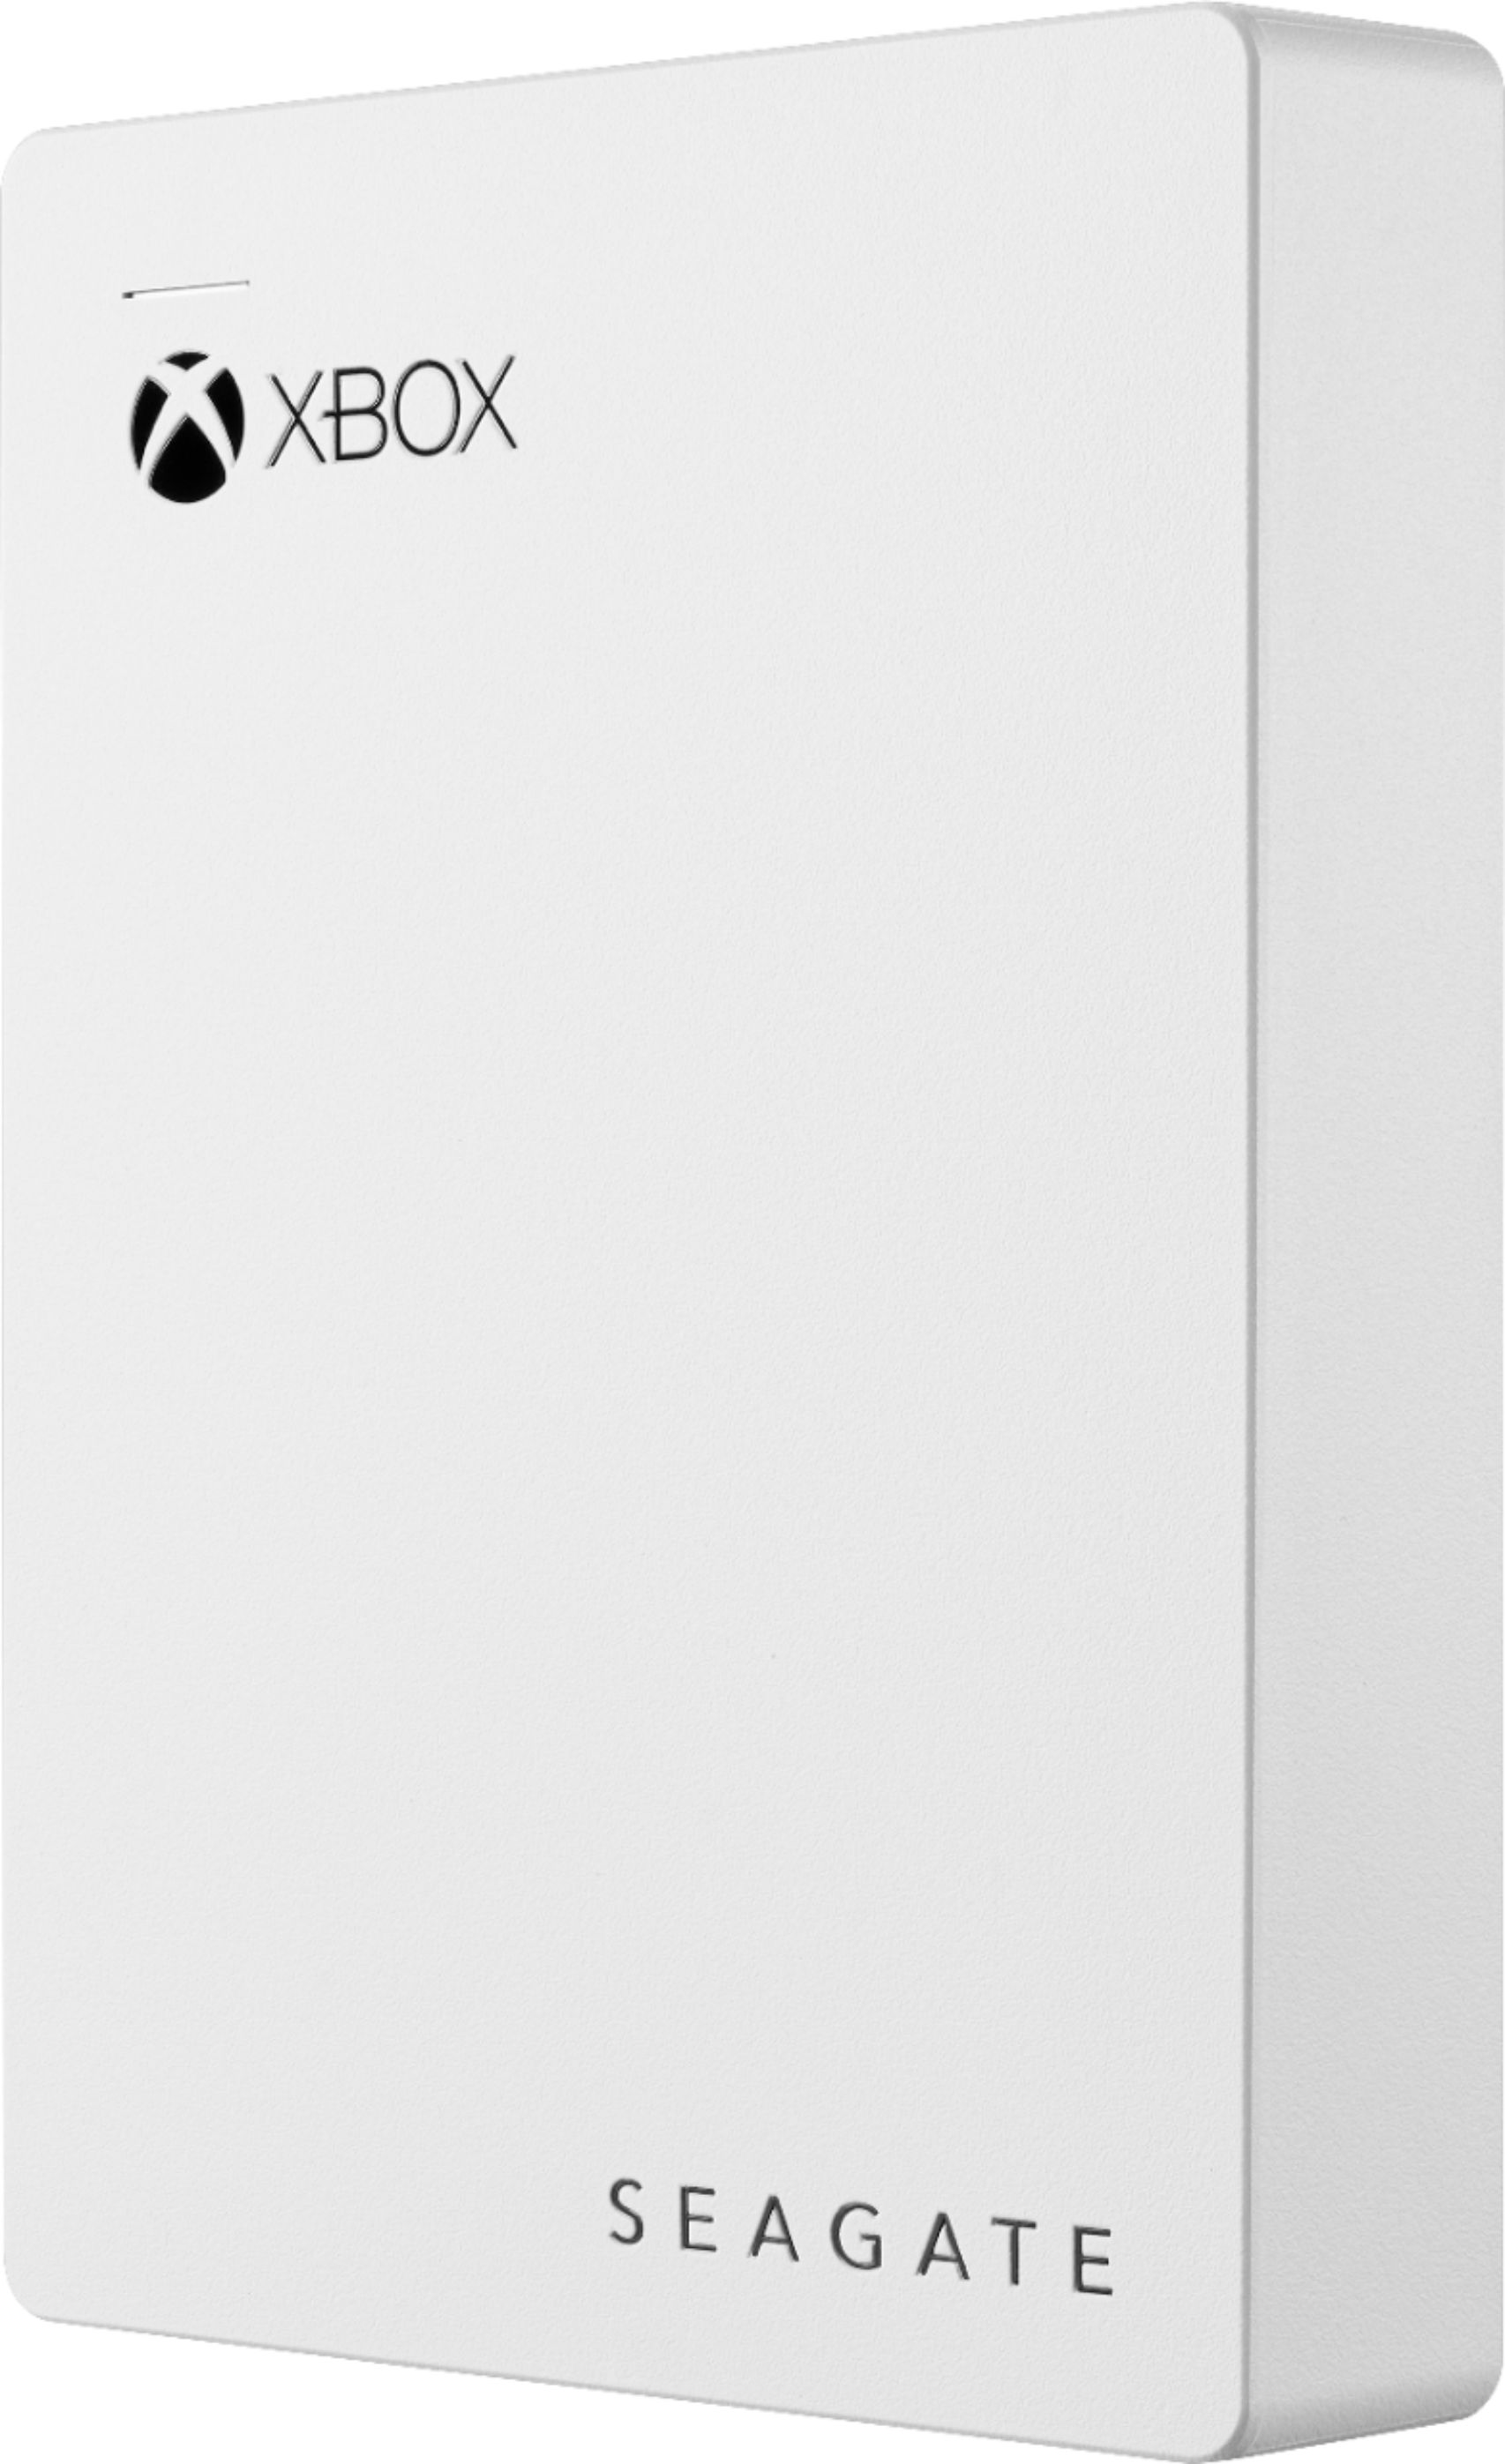 Left View: Seagate - Game Drive for Xbox Officially Licensed 8TB External USB 3.0 Hard Drive - White